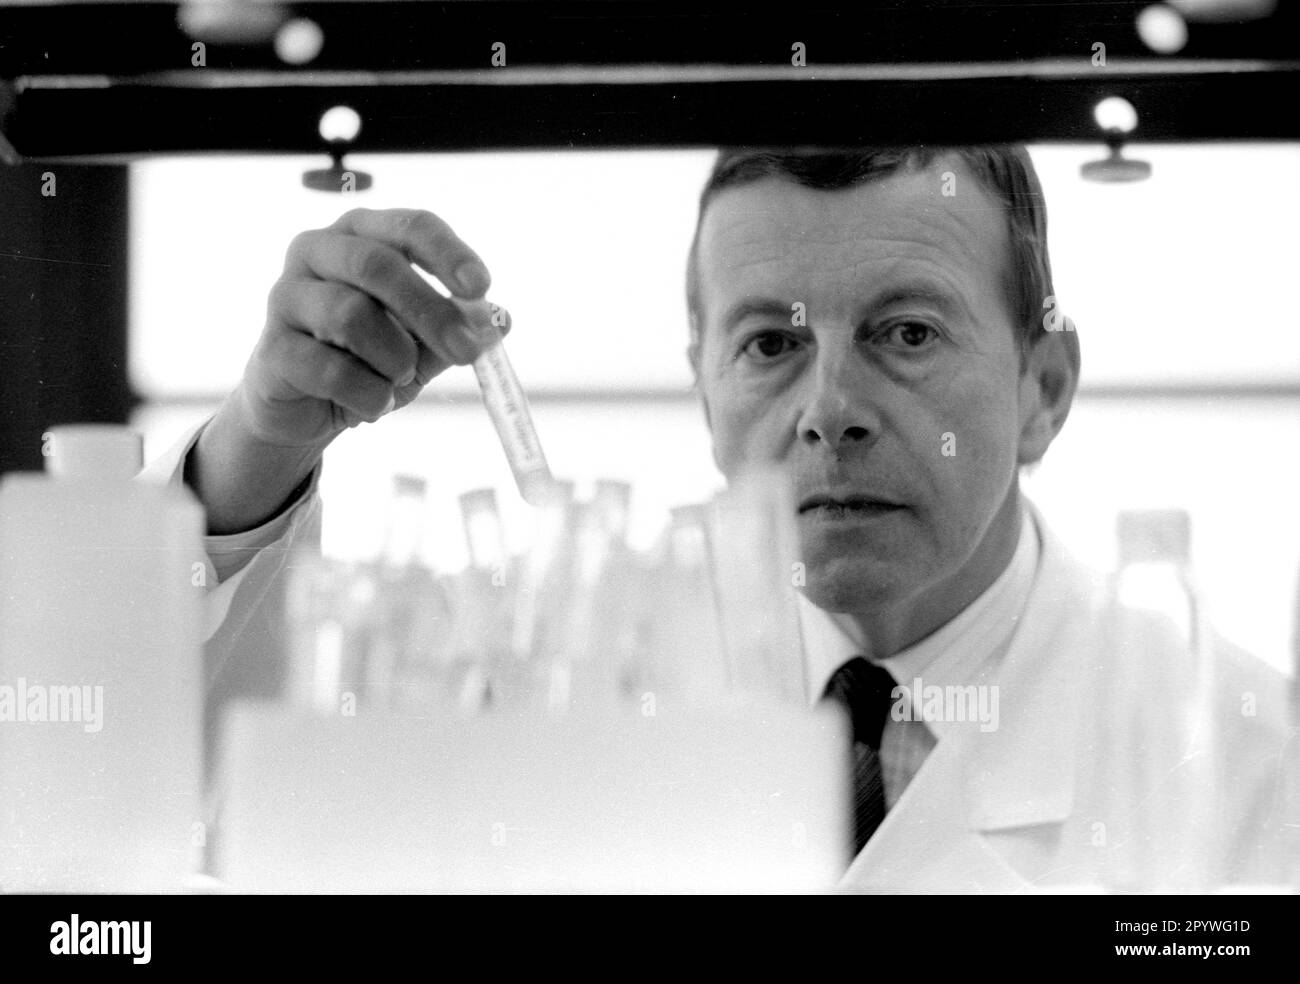 Professor Dr. med Wildor Hollmann Sports University Cologne 18.12.1984 . Prof. Hollmann in the laboratory with test tubes and test tubes respectively [automated translation] Stock Photo